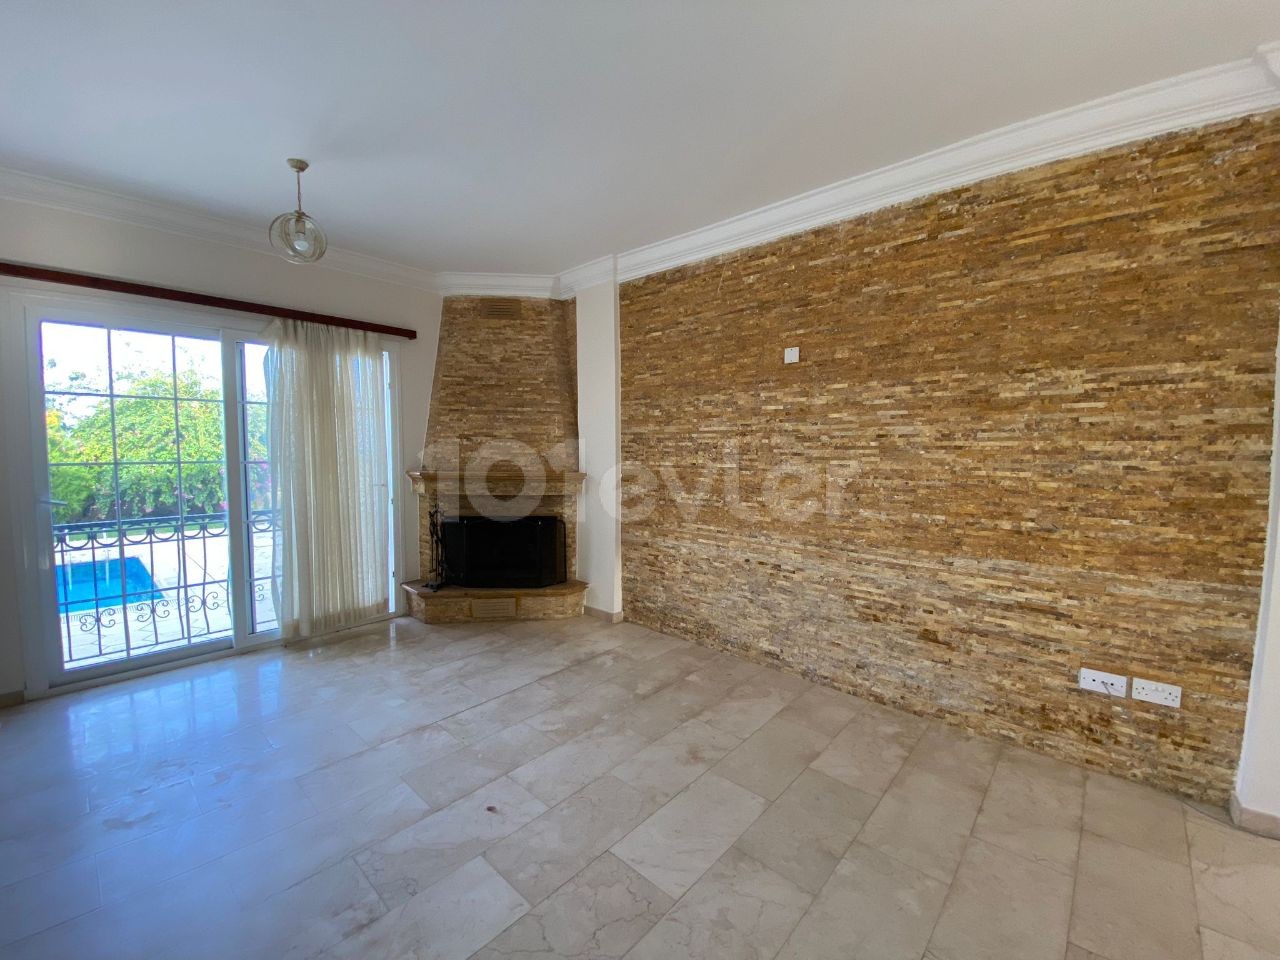 3+1 VILLA OPPORTUNITY WITH SEA AND MOUNTAIN VIEWS IN A UNIQUE LOCATION IN GIRNE EDREMIT!!